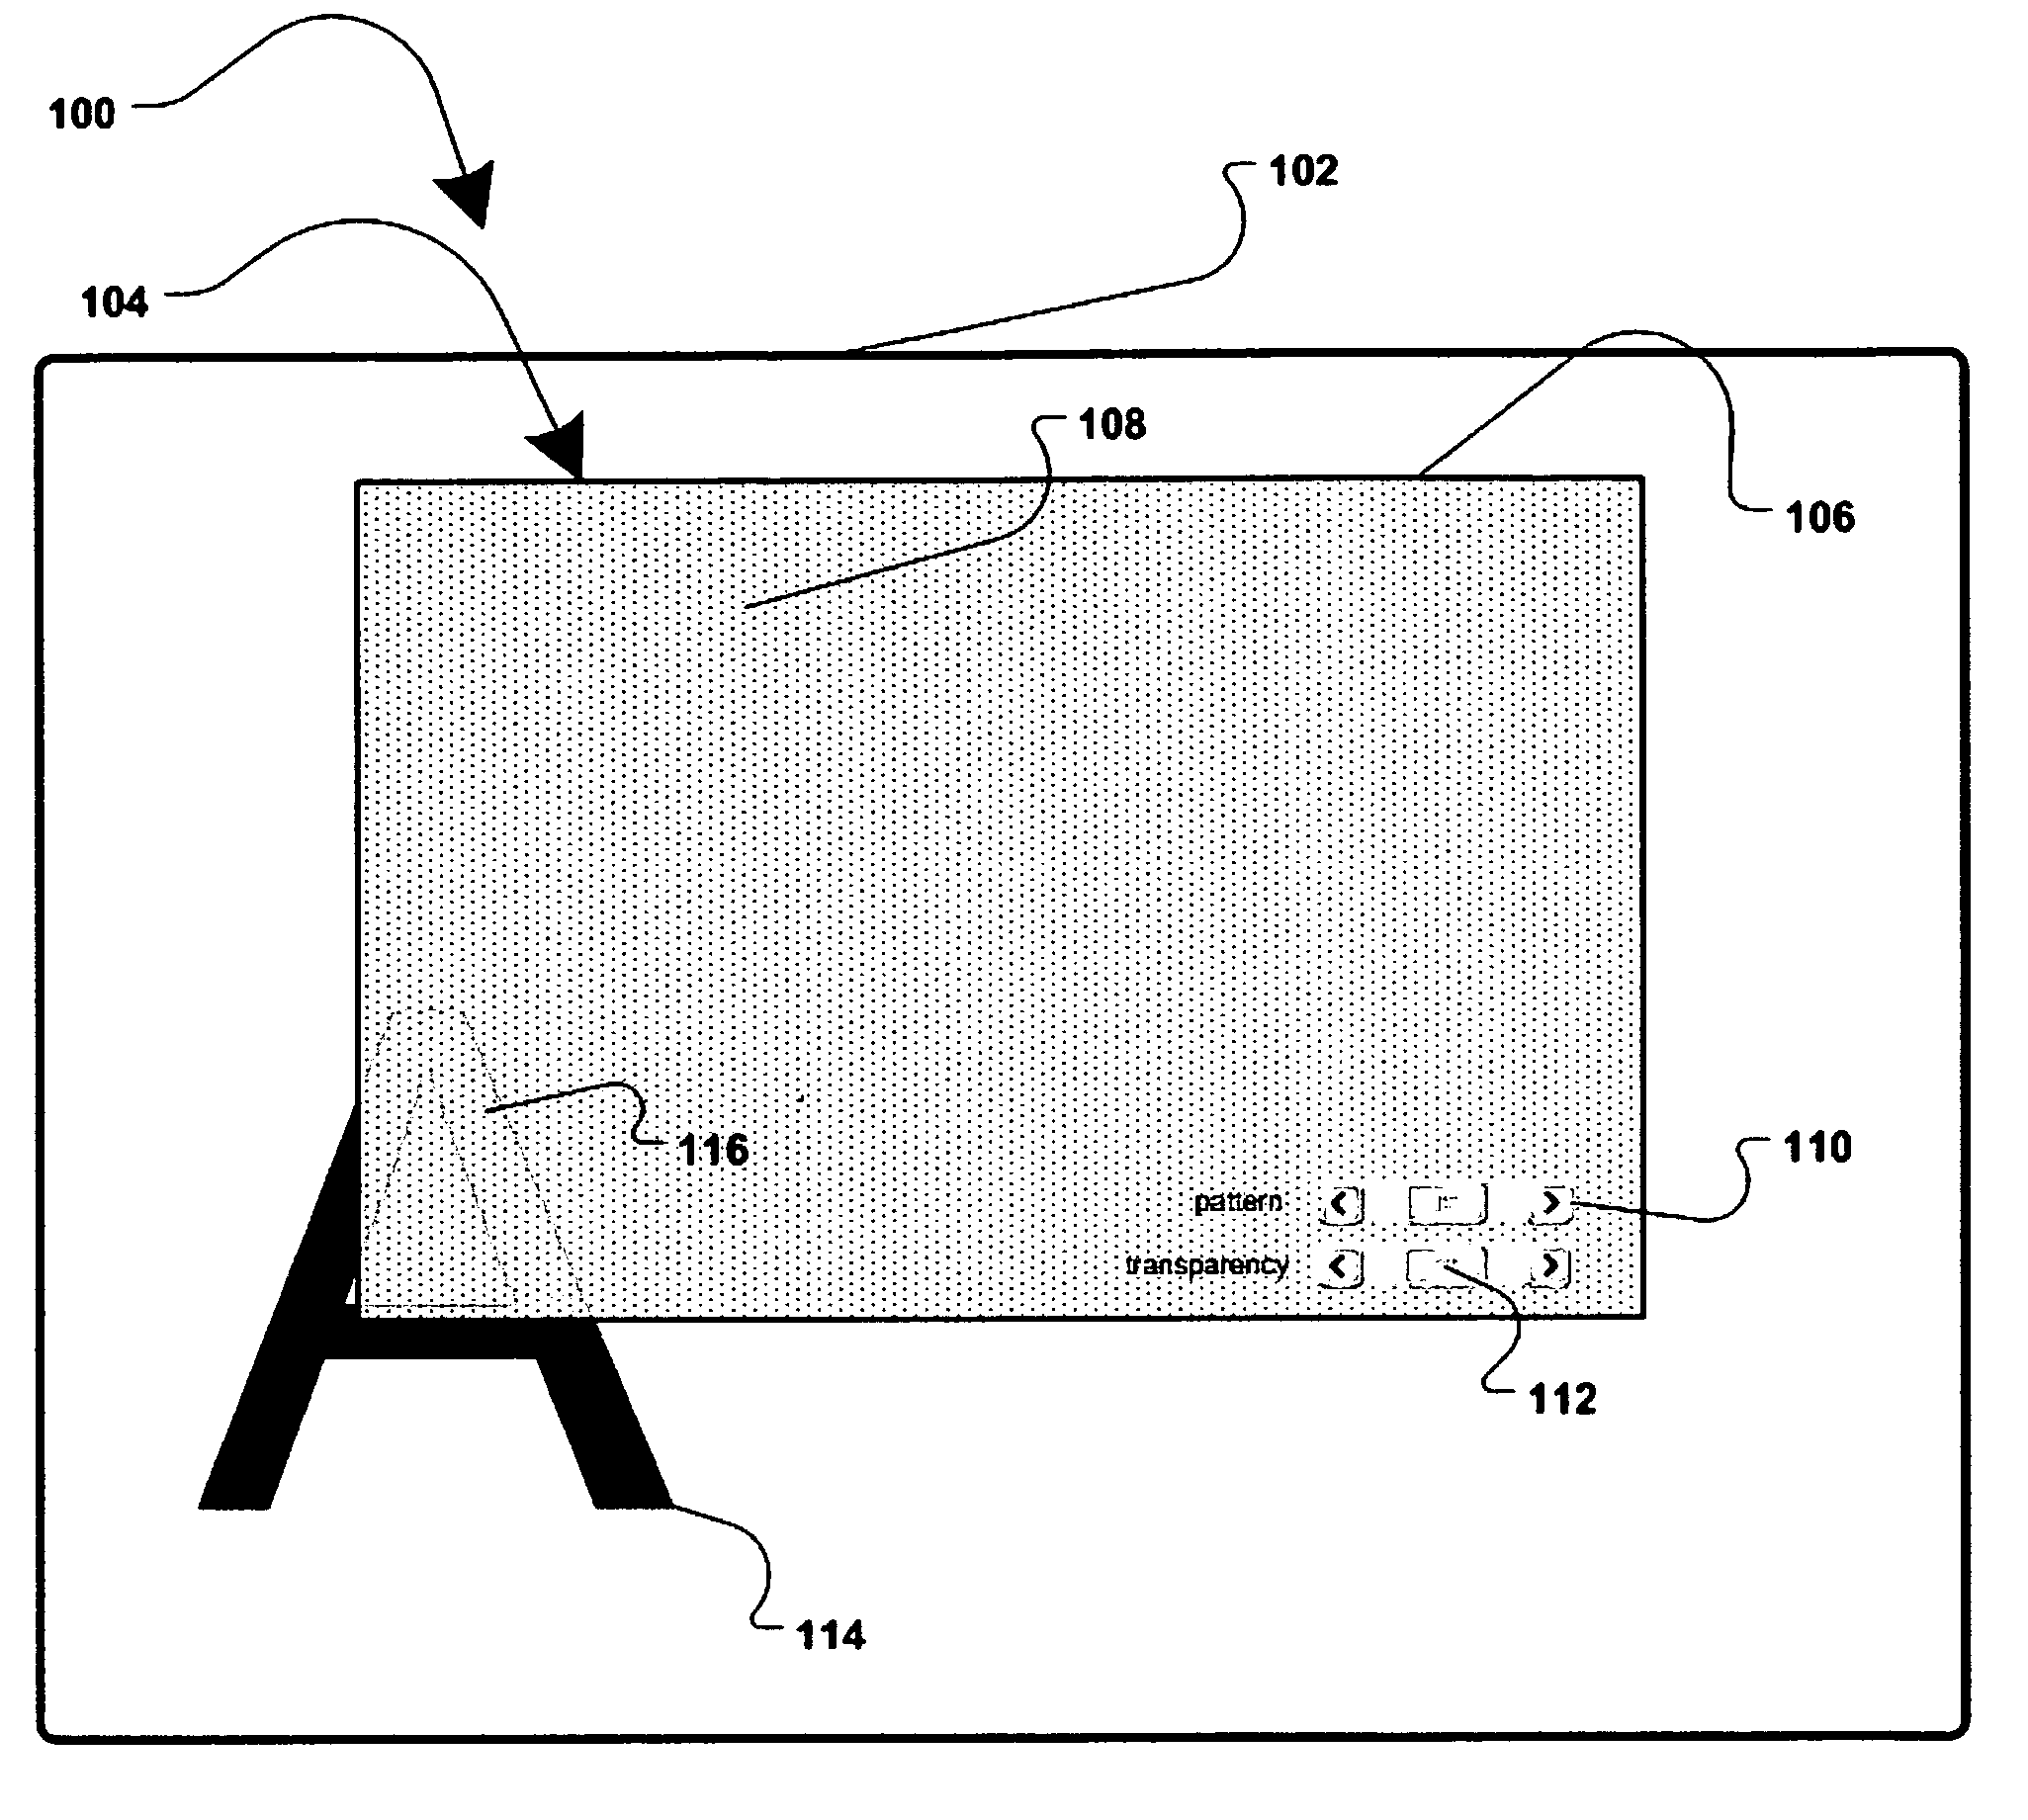 Software-based method for gaining privacy by affecting the screen of a computing device